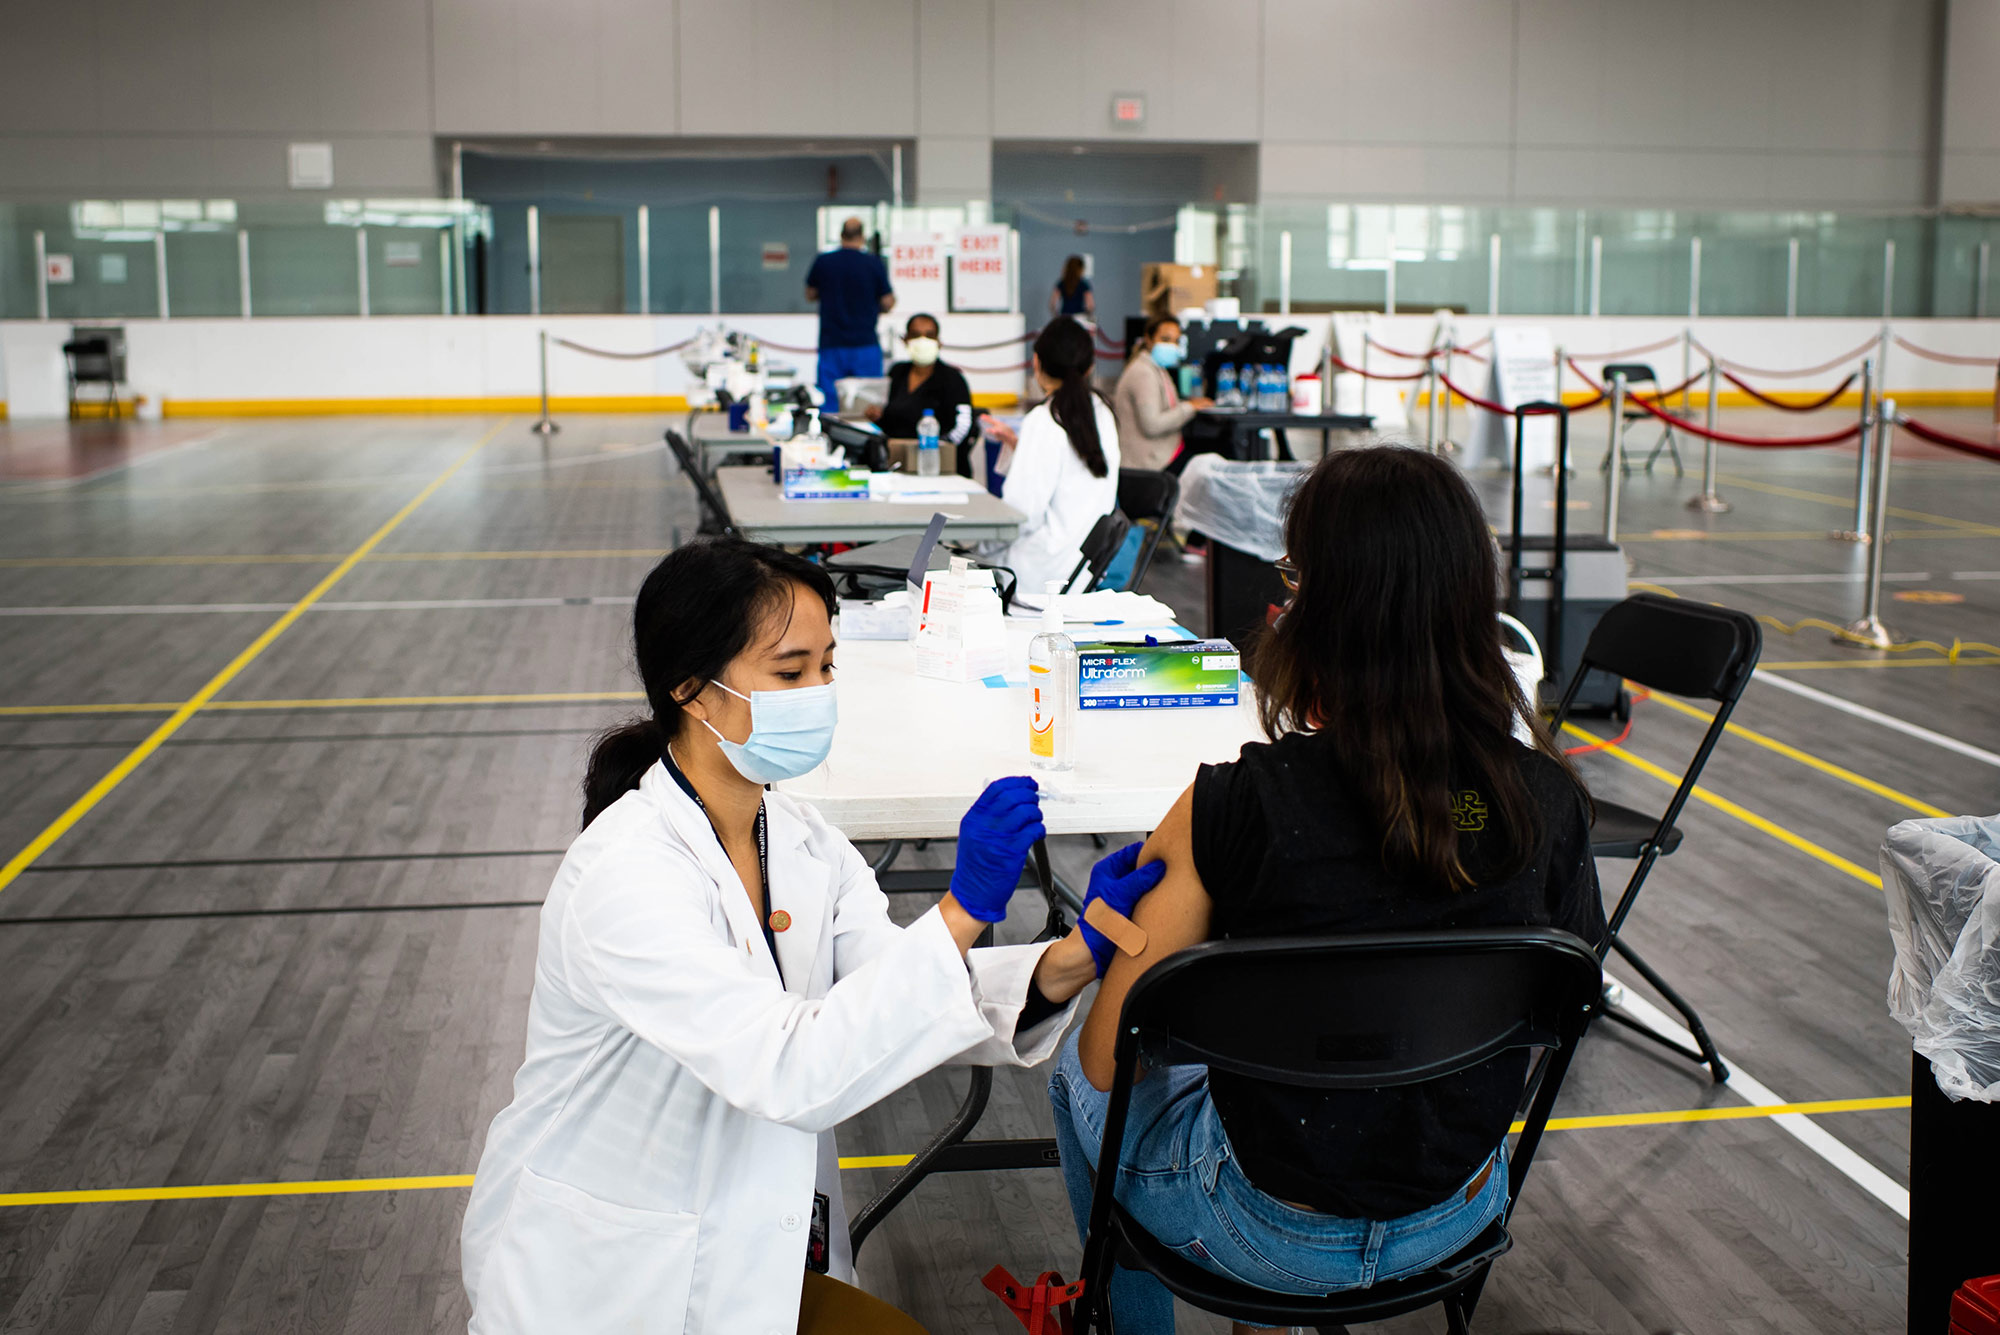 Photo of BU Medical student, Molly Jia Yong Zhao giving a flu shot to a patient during a clinic on September 29, 2020. Behind them are several other tables where flu shots are being administered.